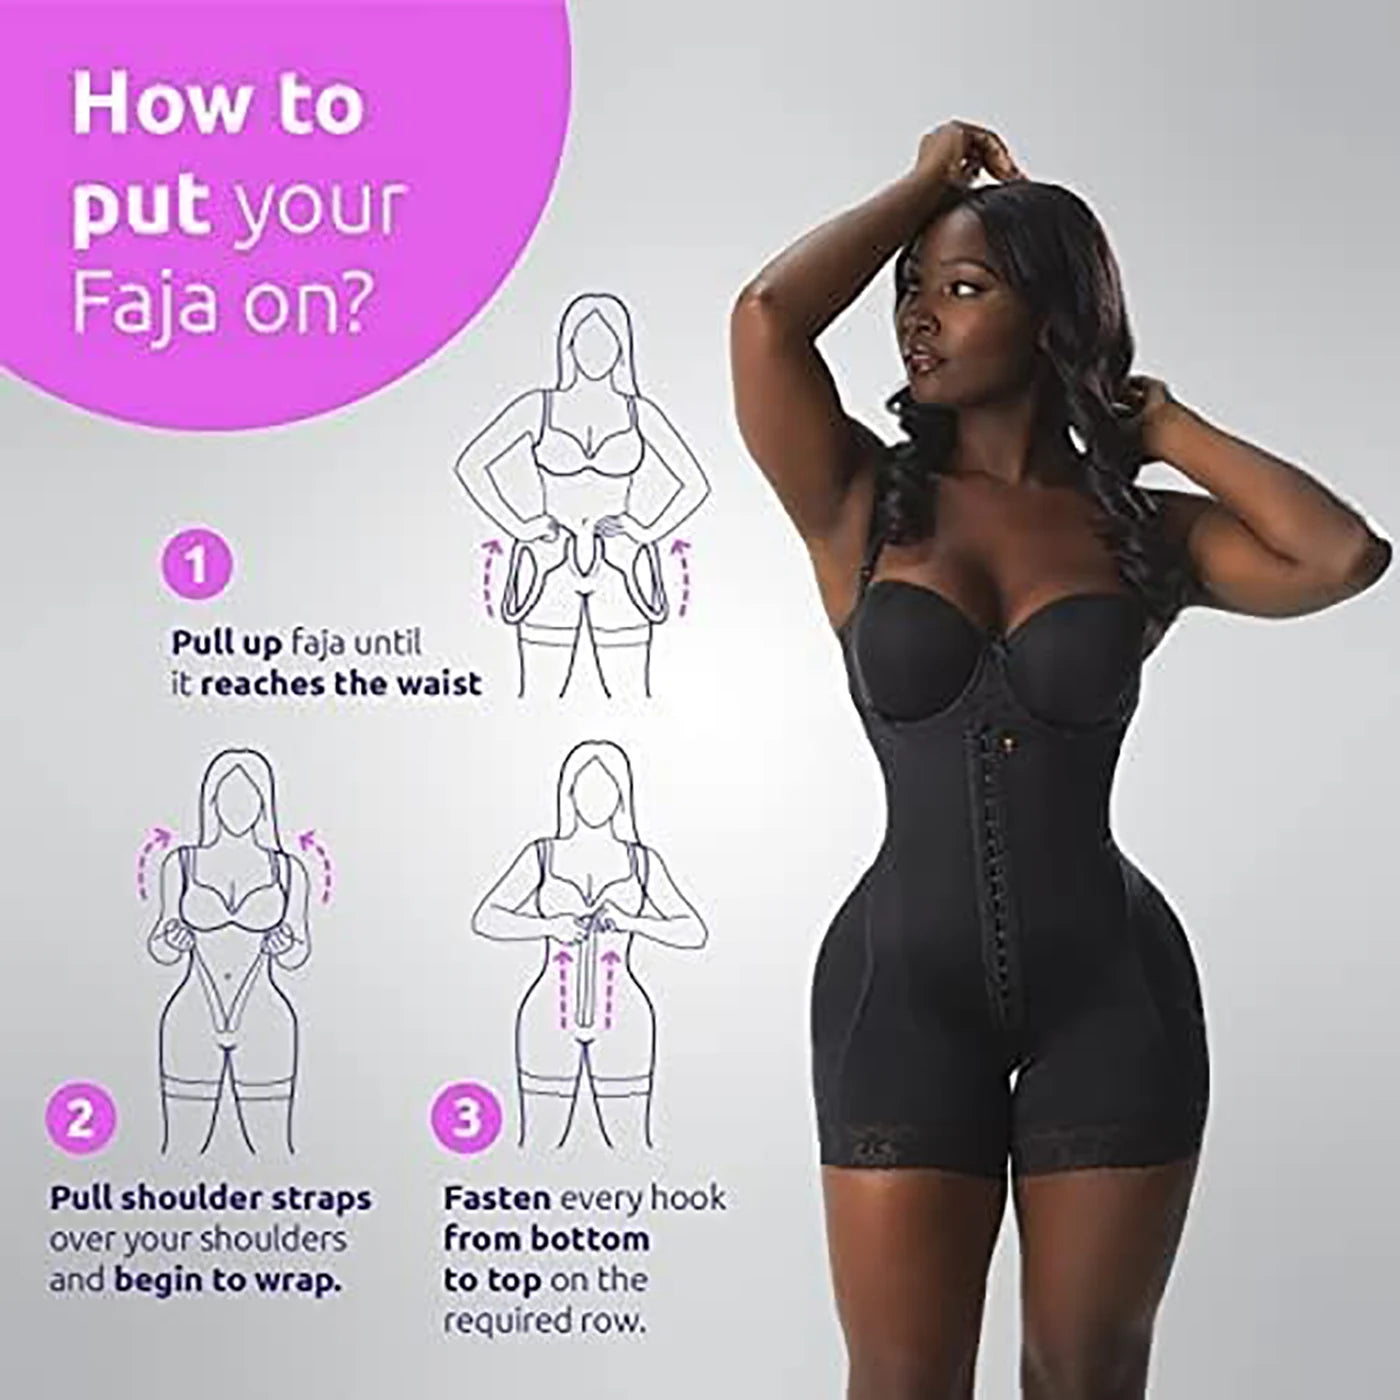 CHECK OUT OUR TOP 5 BEST-SELLING COLOMBIAN FAJAS AND GET THE PERFECT BODY  SHAPE!, by Pretty Girl Curves